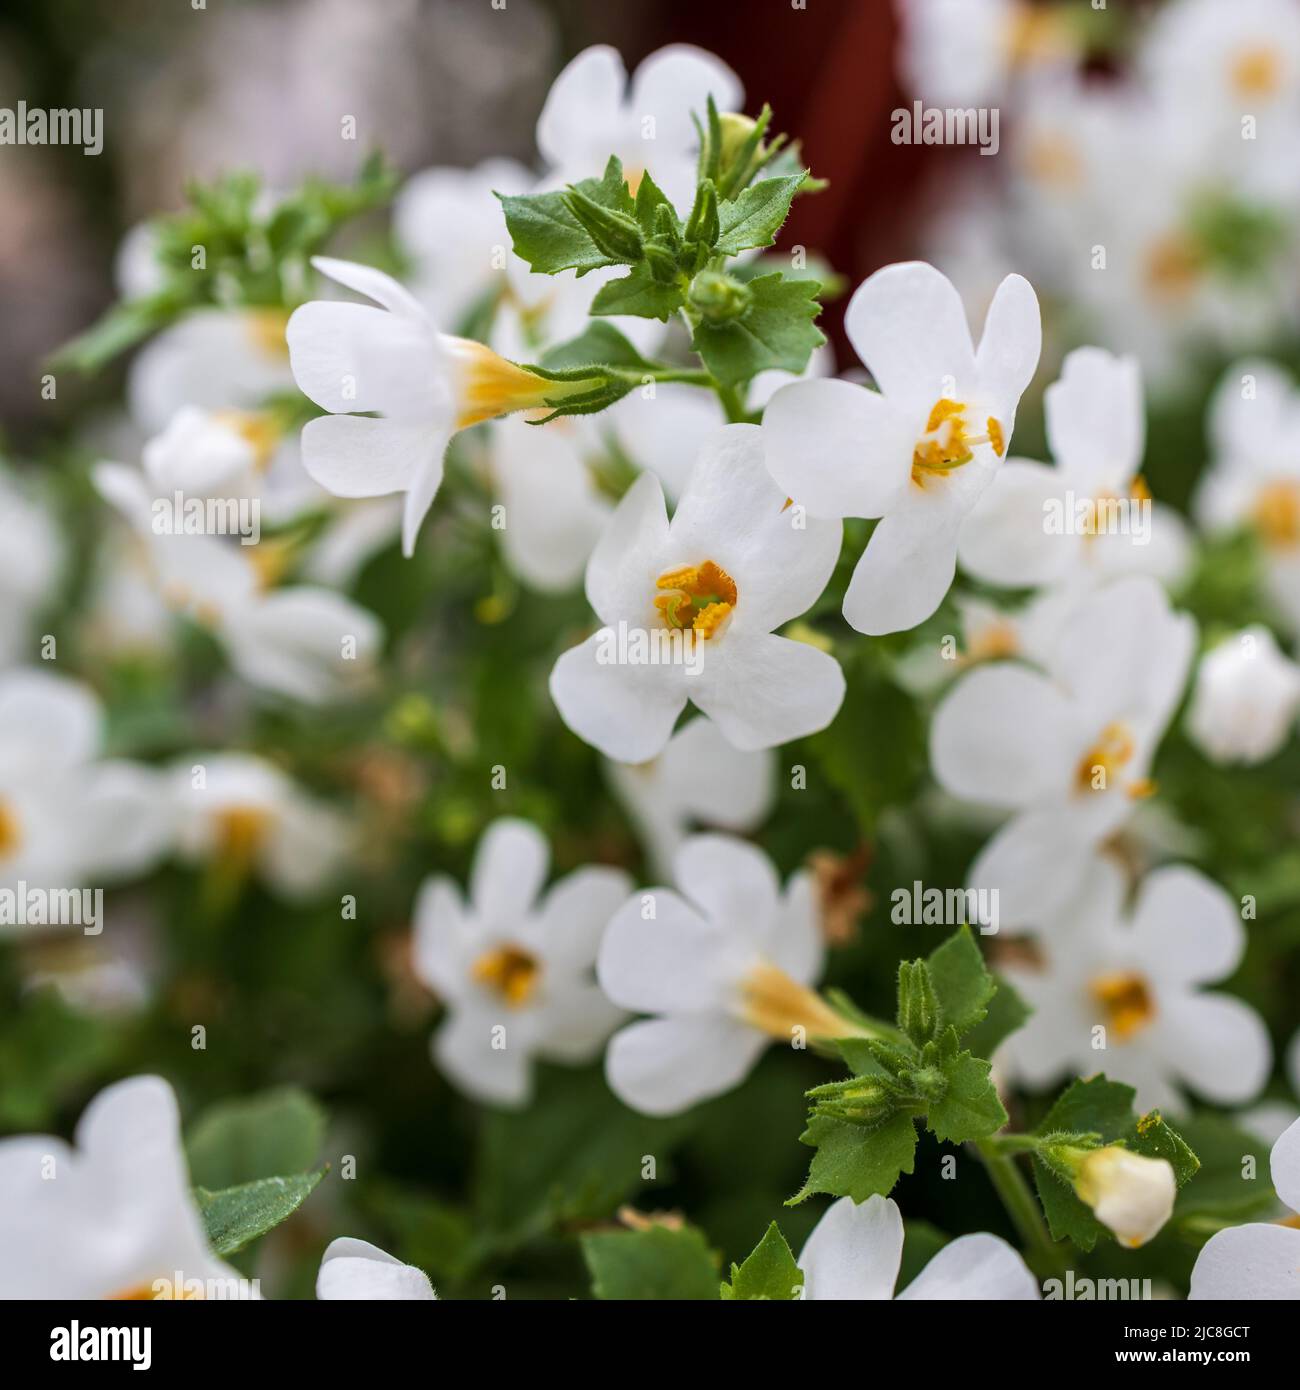 Ornamental bacopa flowers - Latin name - Chaenostoma cordatum. Bacopa monnieri, herb Bacopa is a medicinal herb used in Ayurveda, also known as Brahmi Stock Photo